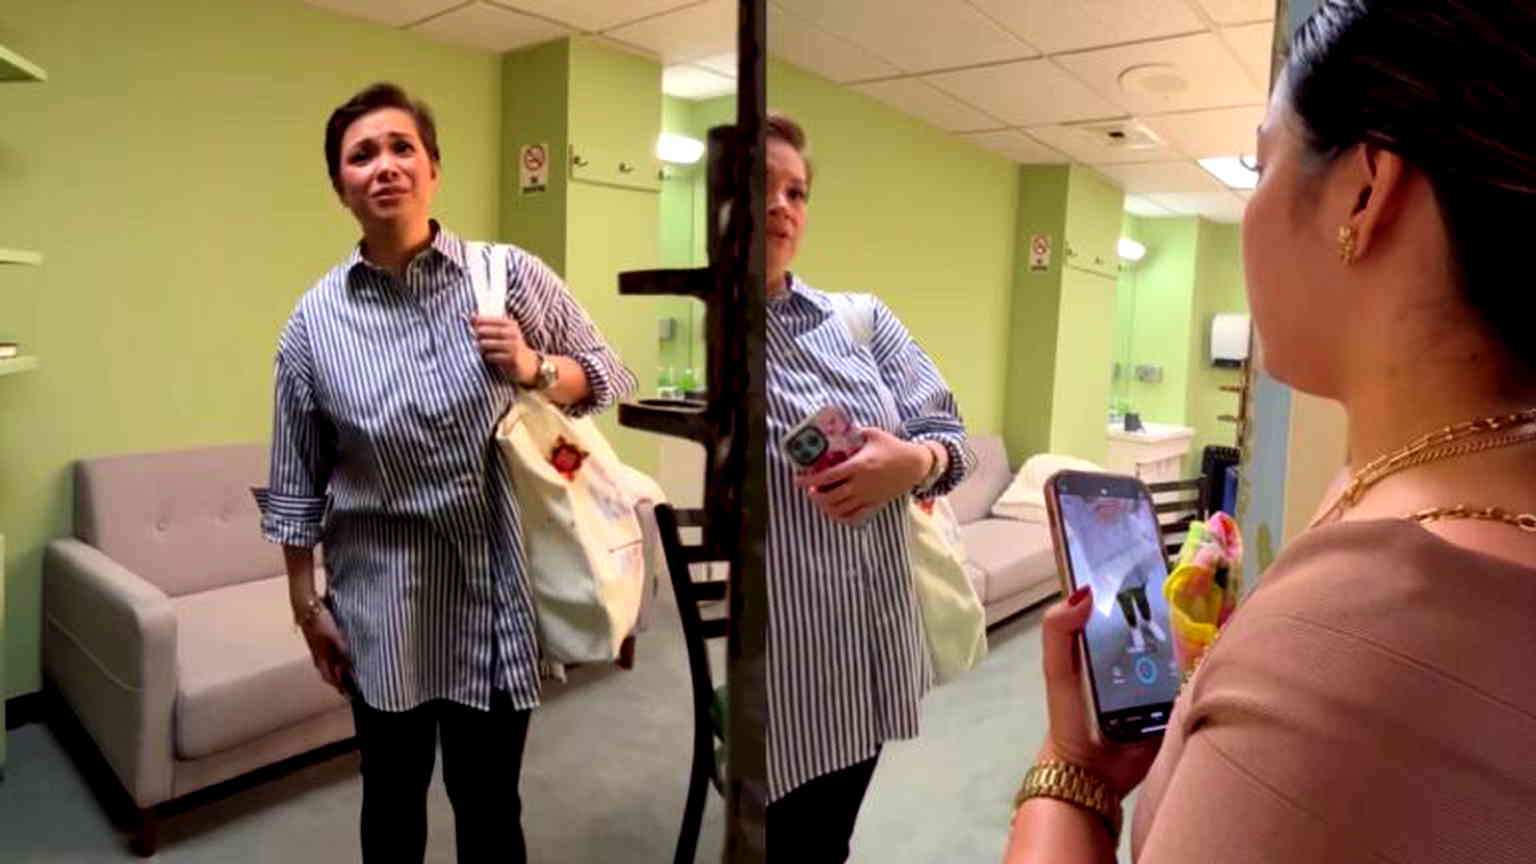 Watch: Lea Salonga’s viral reaction to fans who harassed her backstage